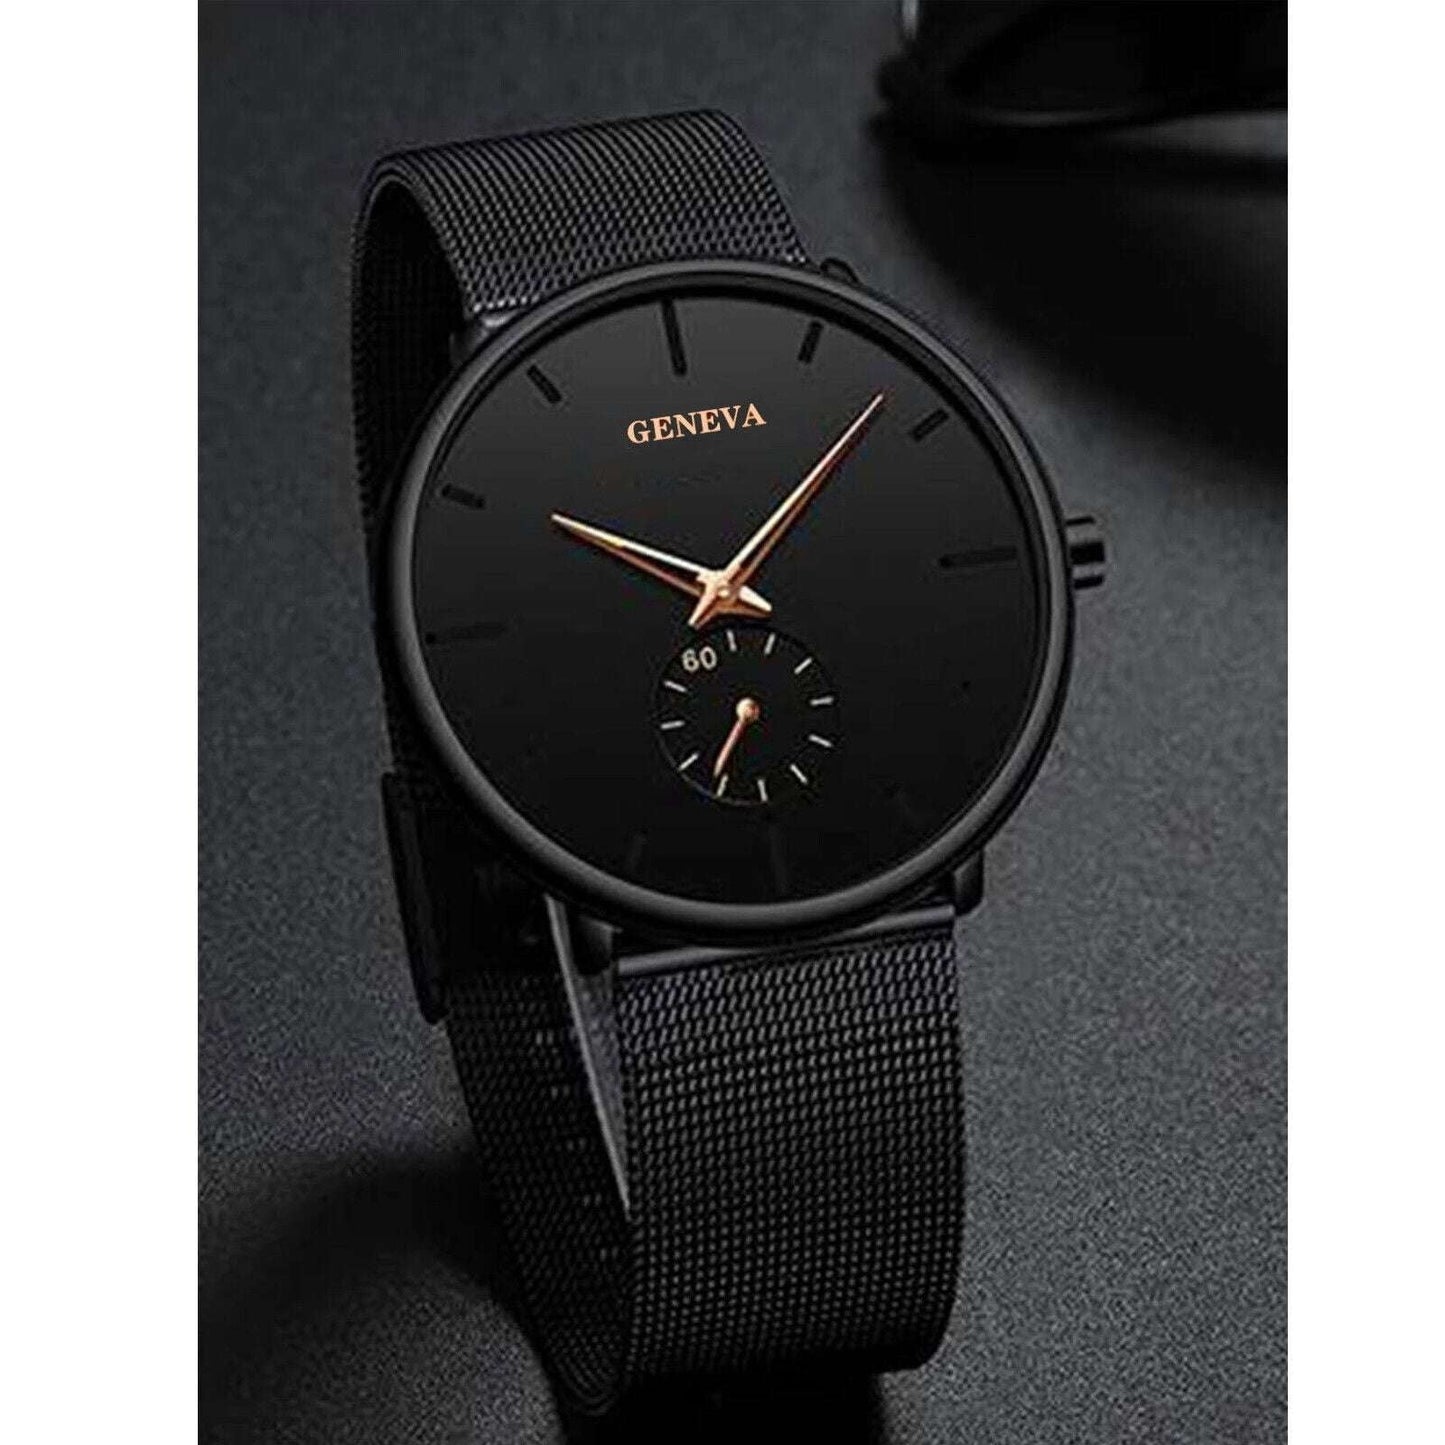 Men's Quartz Timepiece, Ultra Thin Watch, Waterproof Business Watch - available at Sparq Mart